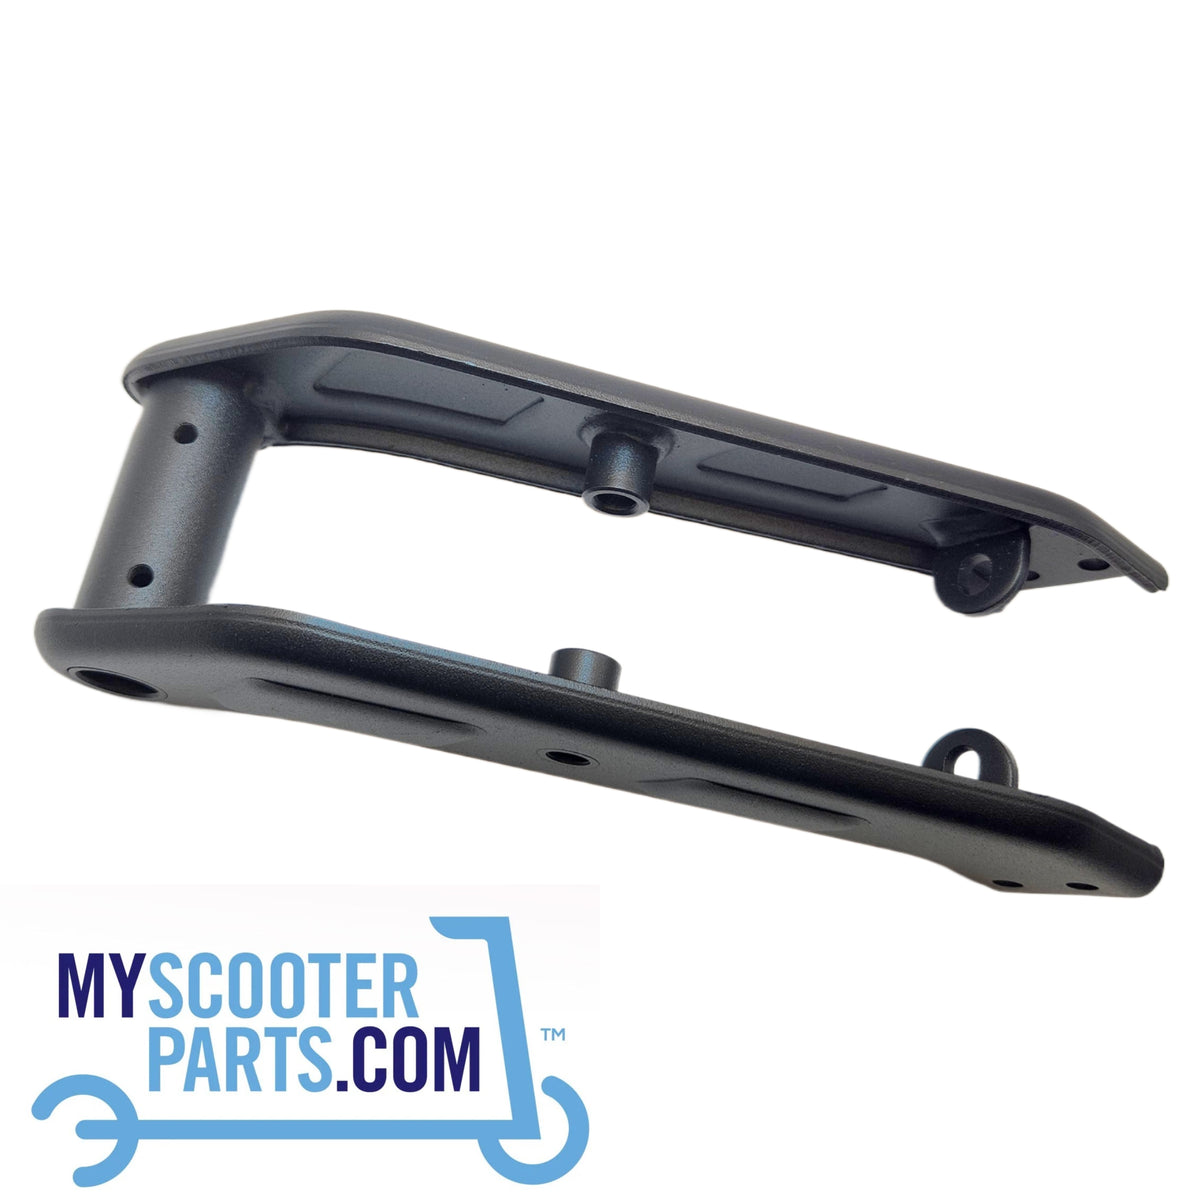 MERCANE G2 MAX FRONT MOUNT ASSEMBLY